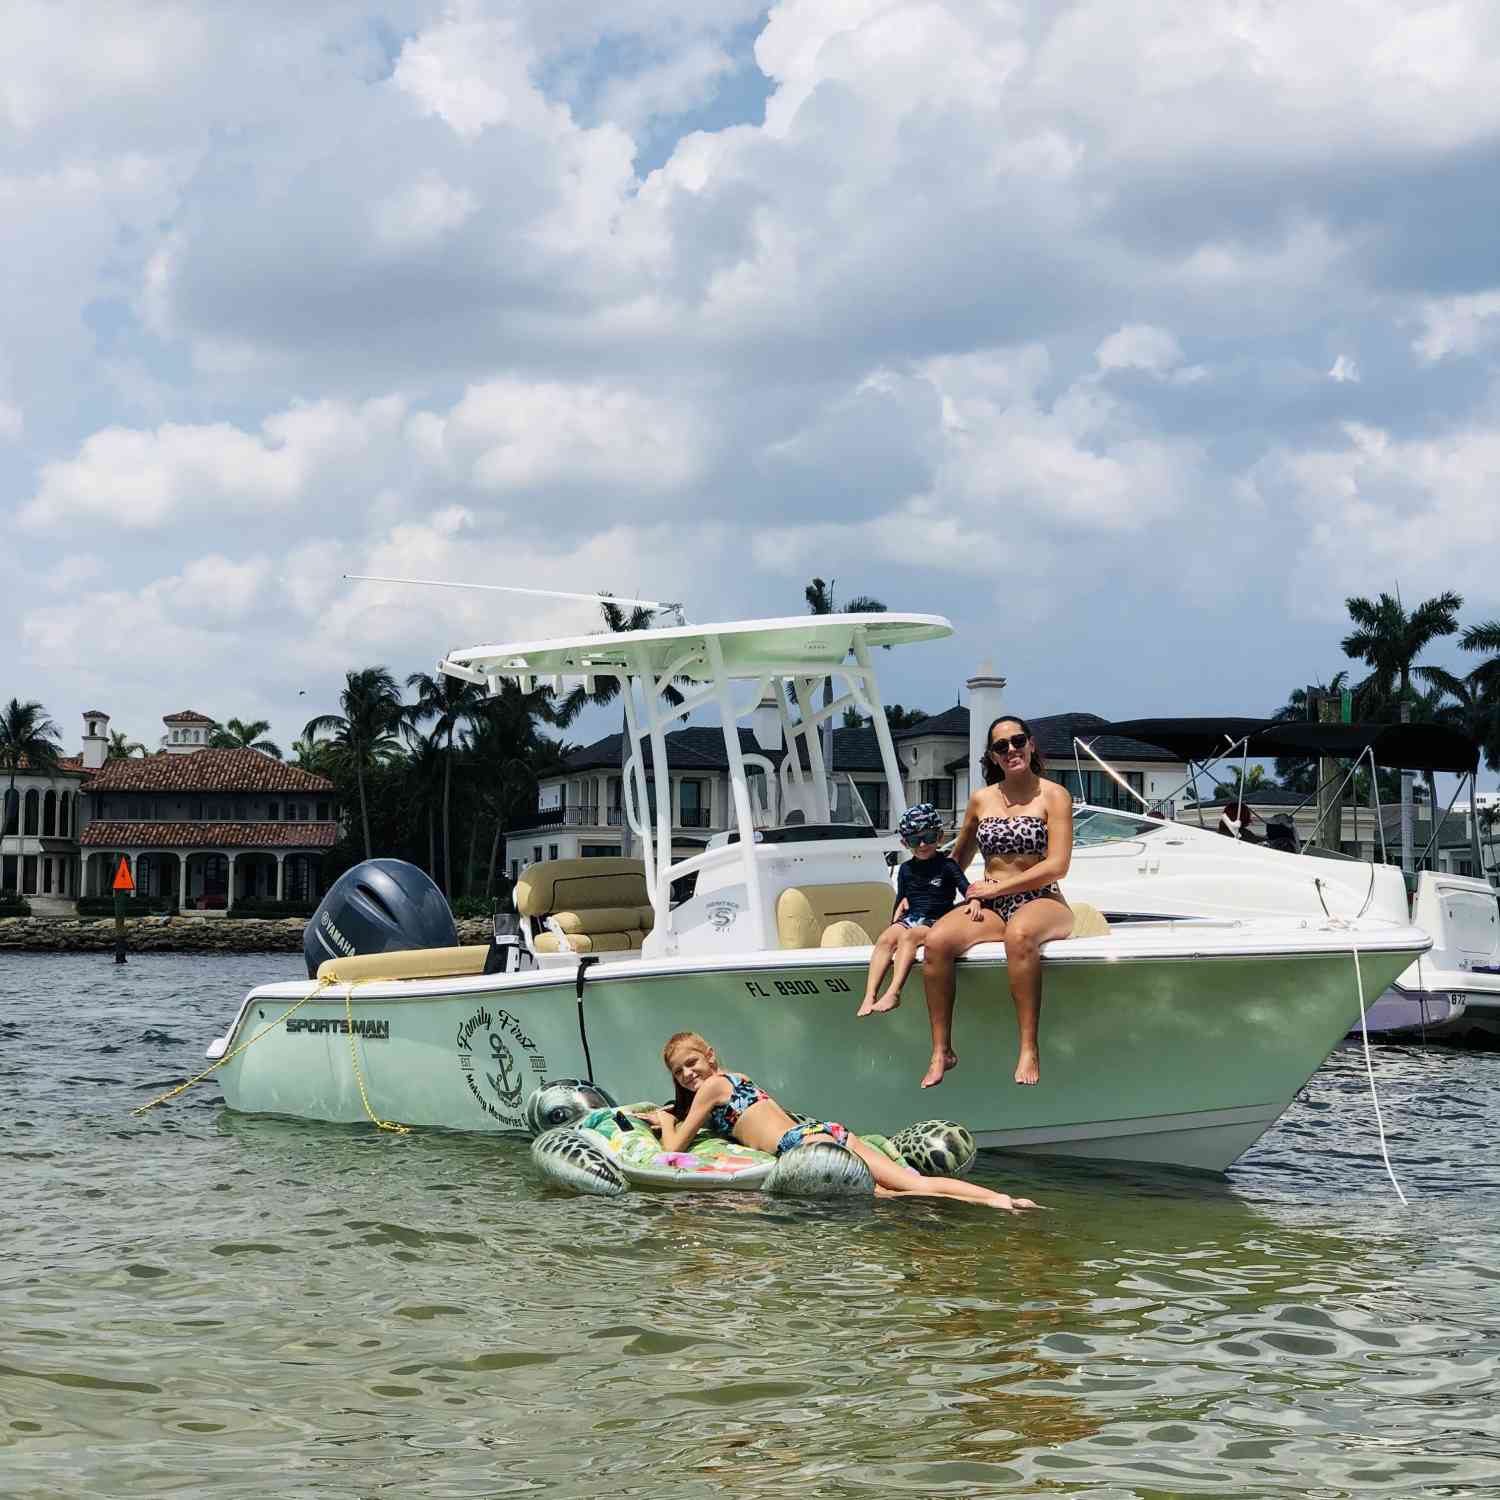 Title: FAMILY FIRST - On board their Sportsman Heritage 211 Center Console - Location: Fort Lauderdale Sandbar. Participating in the Photo Contest #SportsmanMay2021